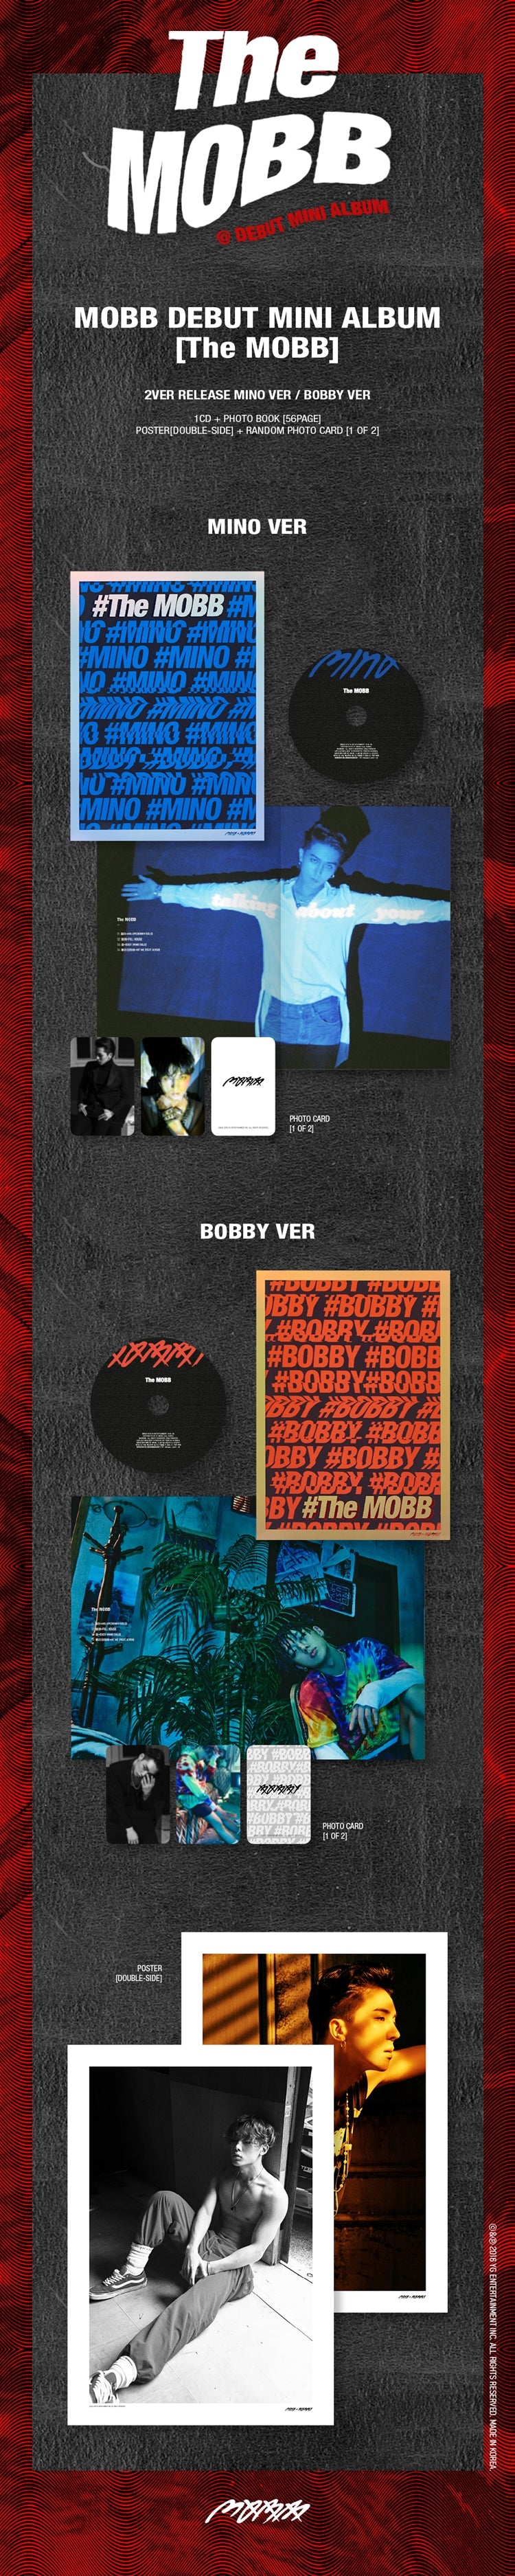 DEBUT MINI ALBUM [The MOBB] MOBB, YG's first collaboration unit between two groups. This album <The MOBB>, which is a meet...